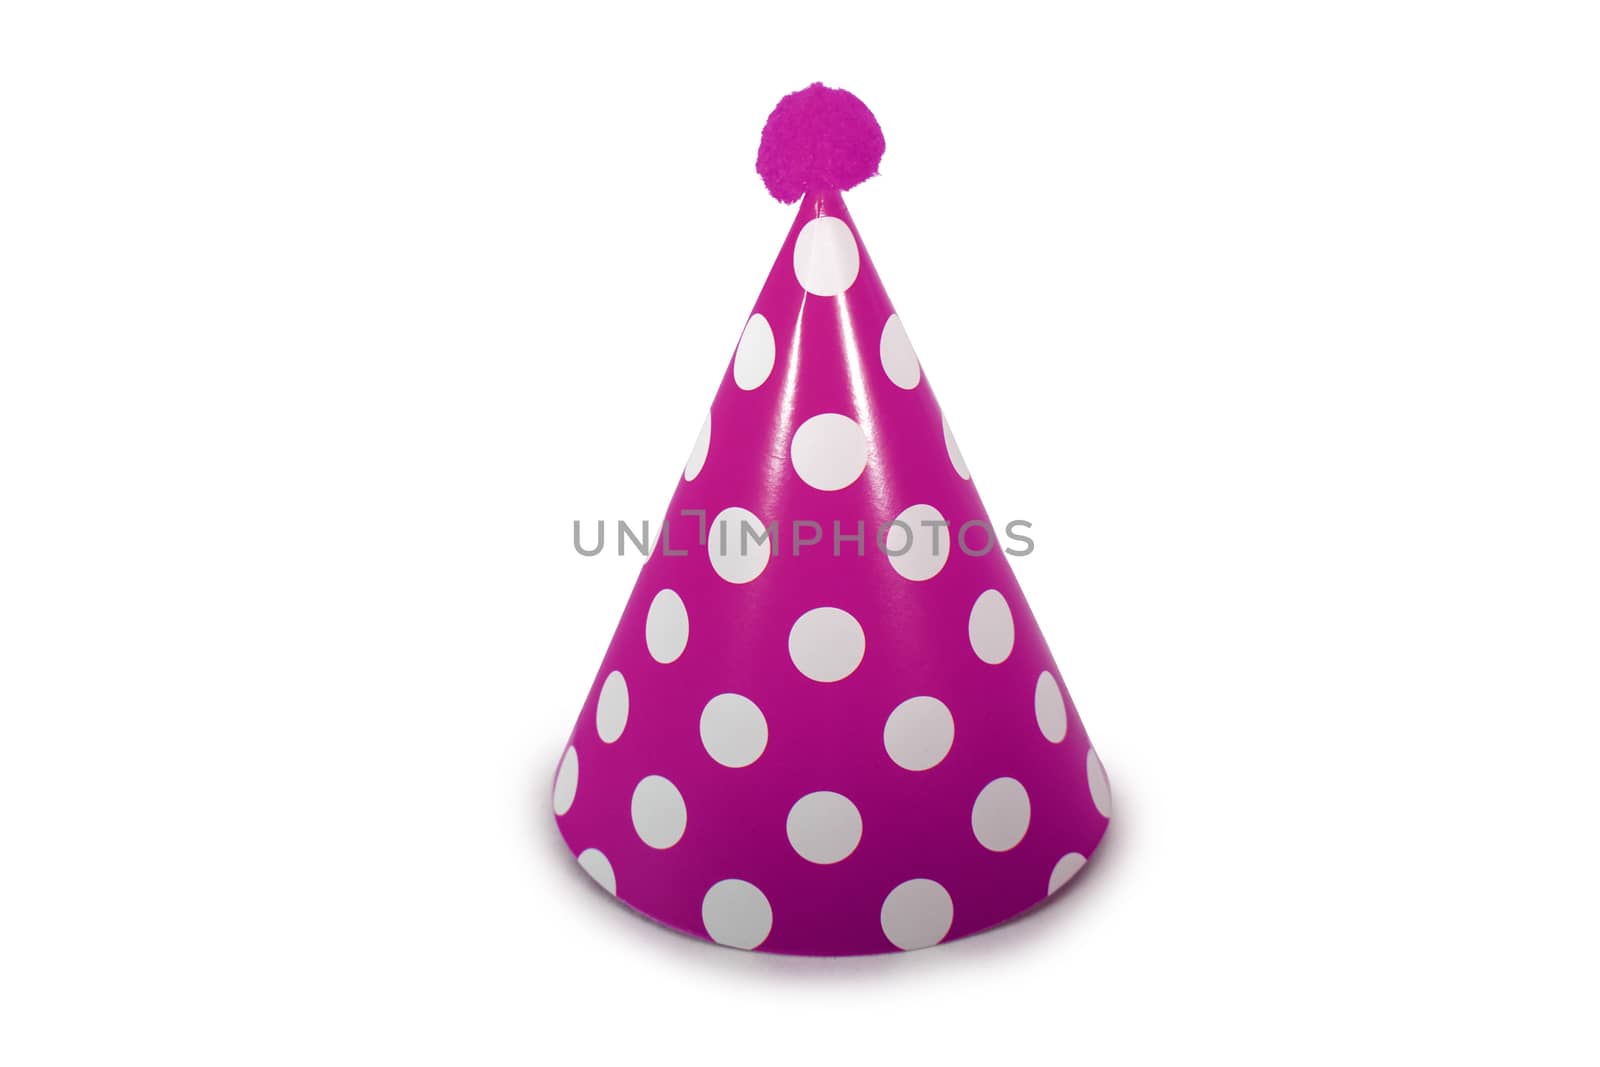 A Pink Birthday Hat with White Polka-Dots on a Pure White Background